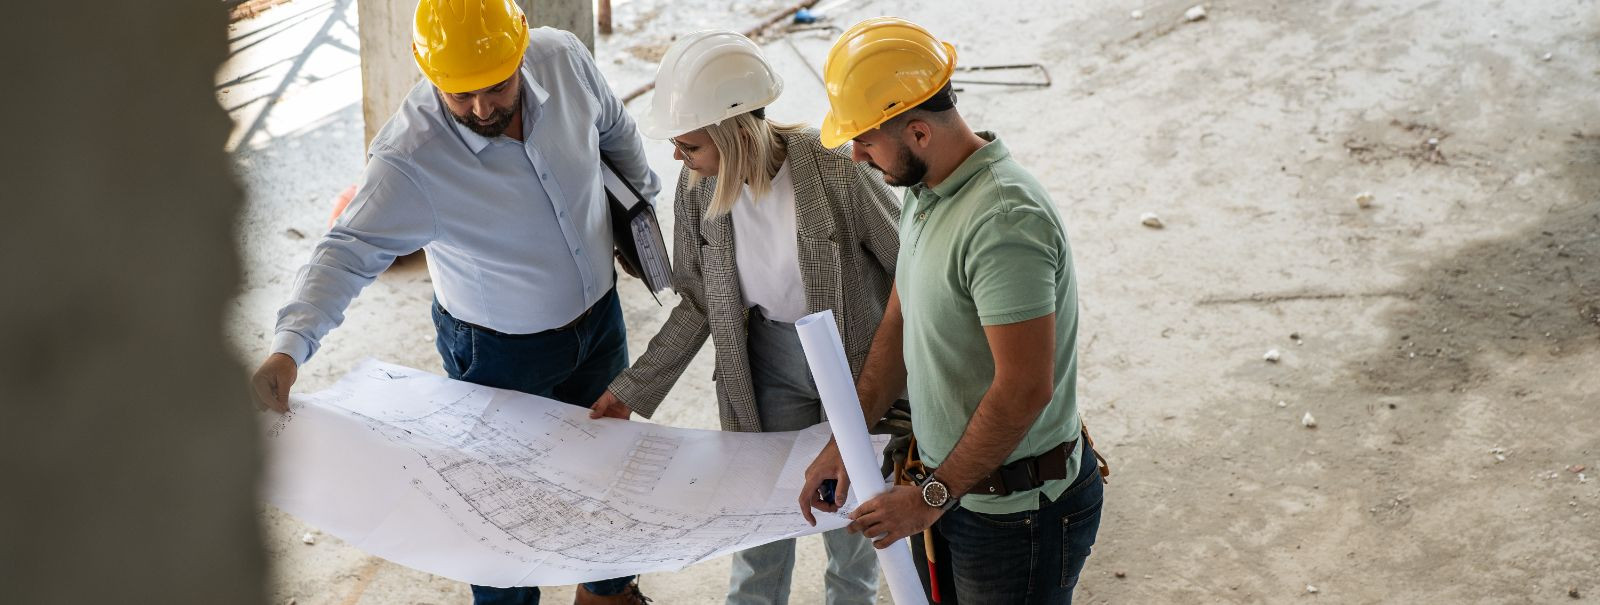 Building law encompasses the regulations and legal standards that govern the design, construction, alteration, and maintenance of buildings. It is a critical as